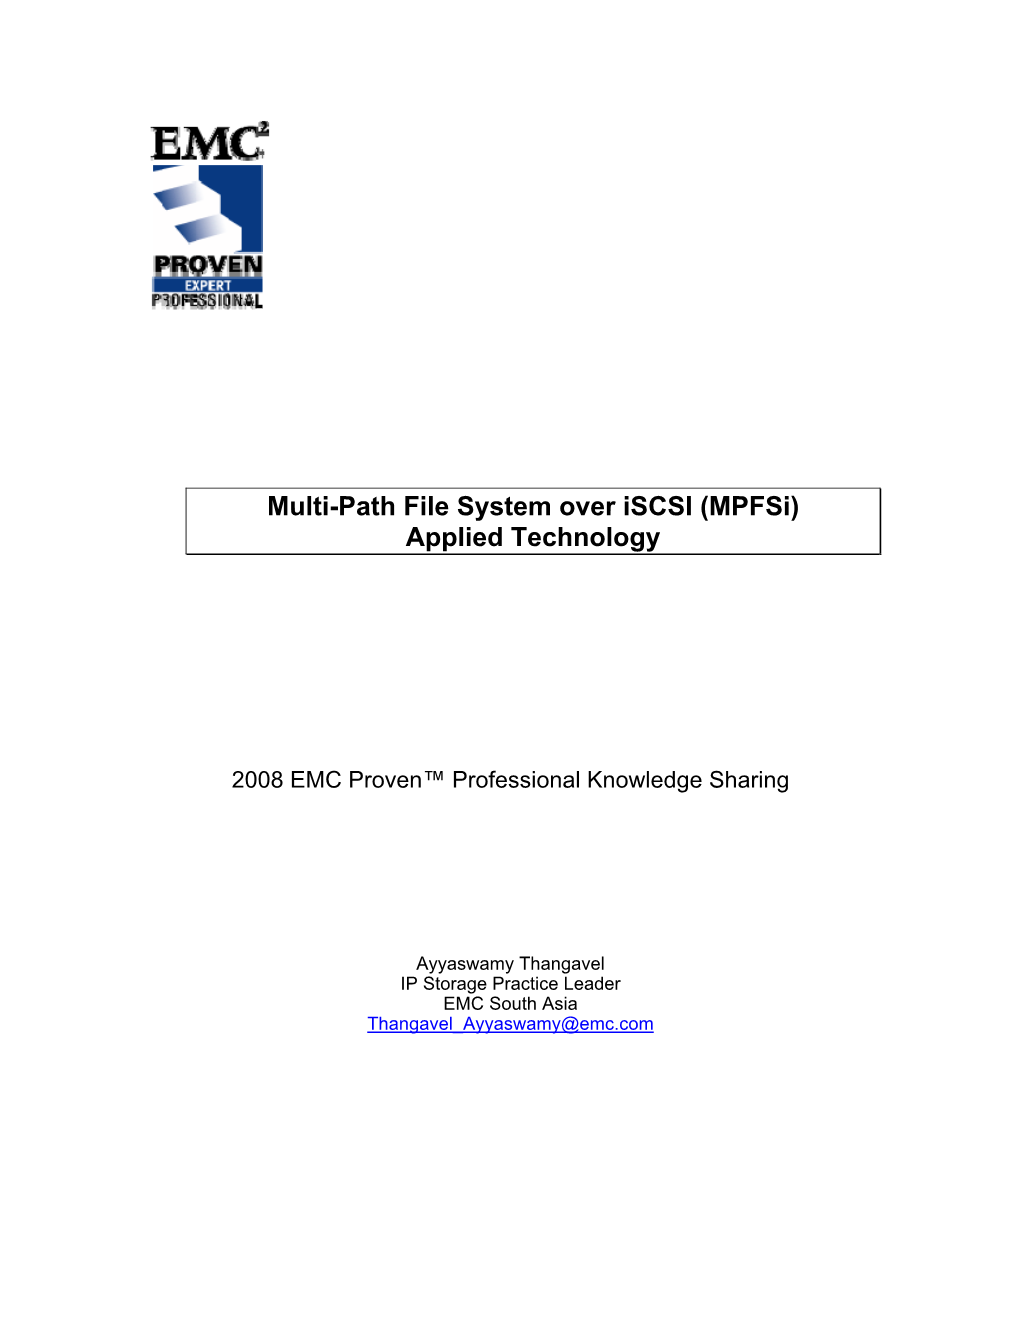 Multi-Path File System Over Iscsi (Mpfsi) Applied Technology